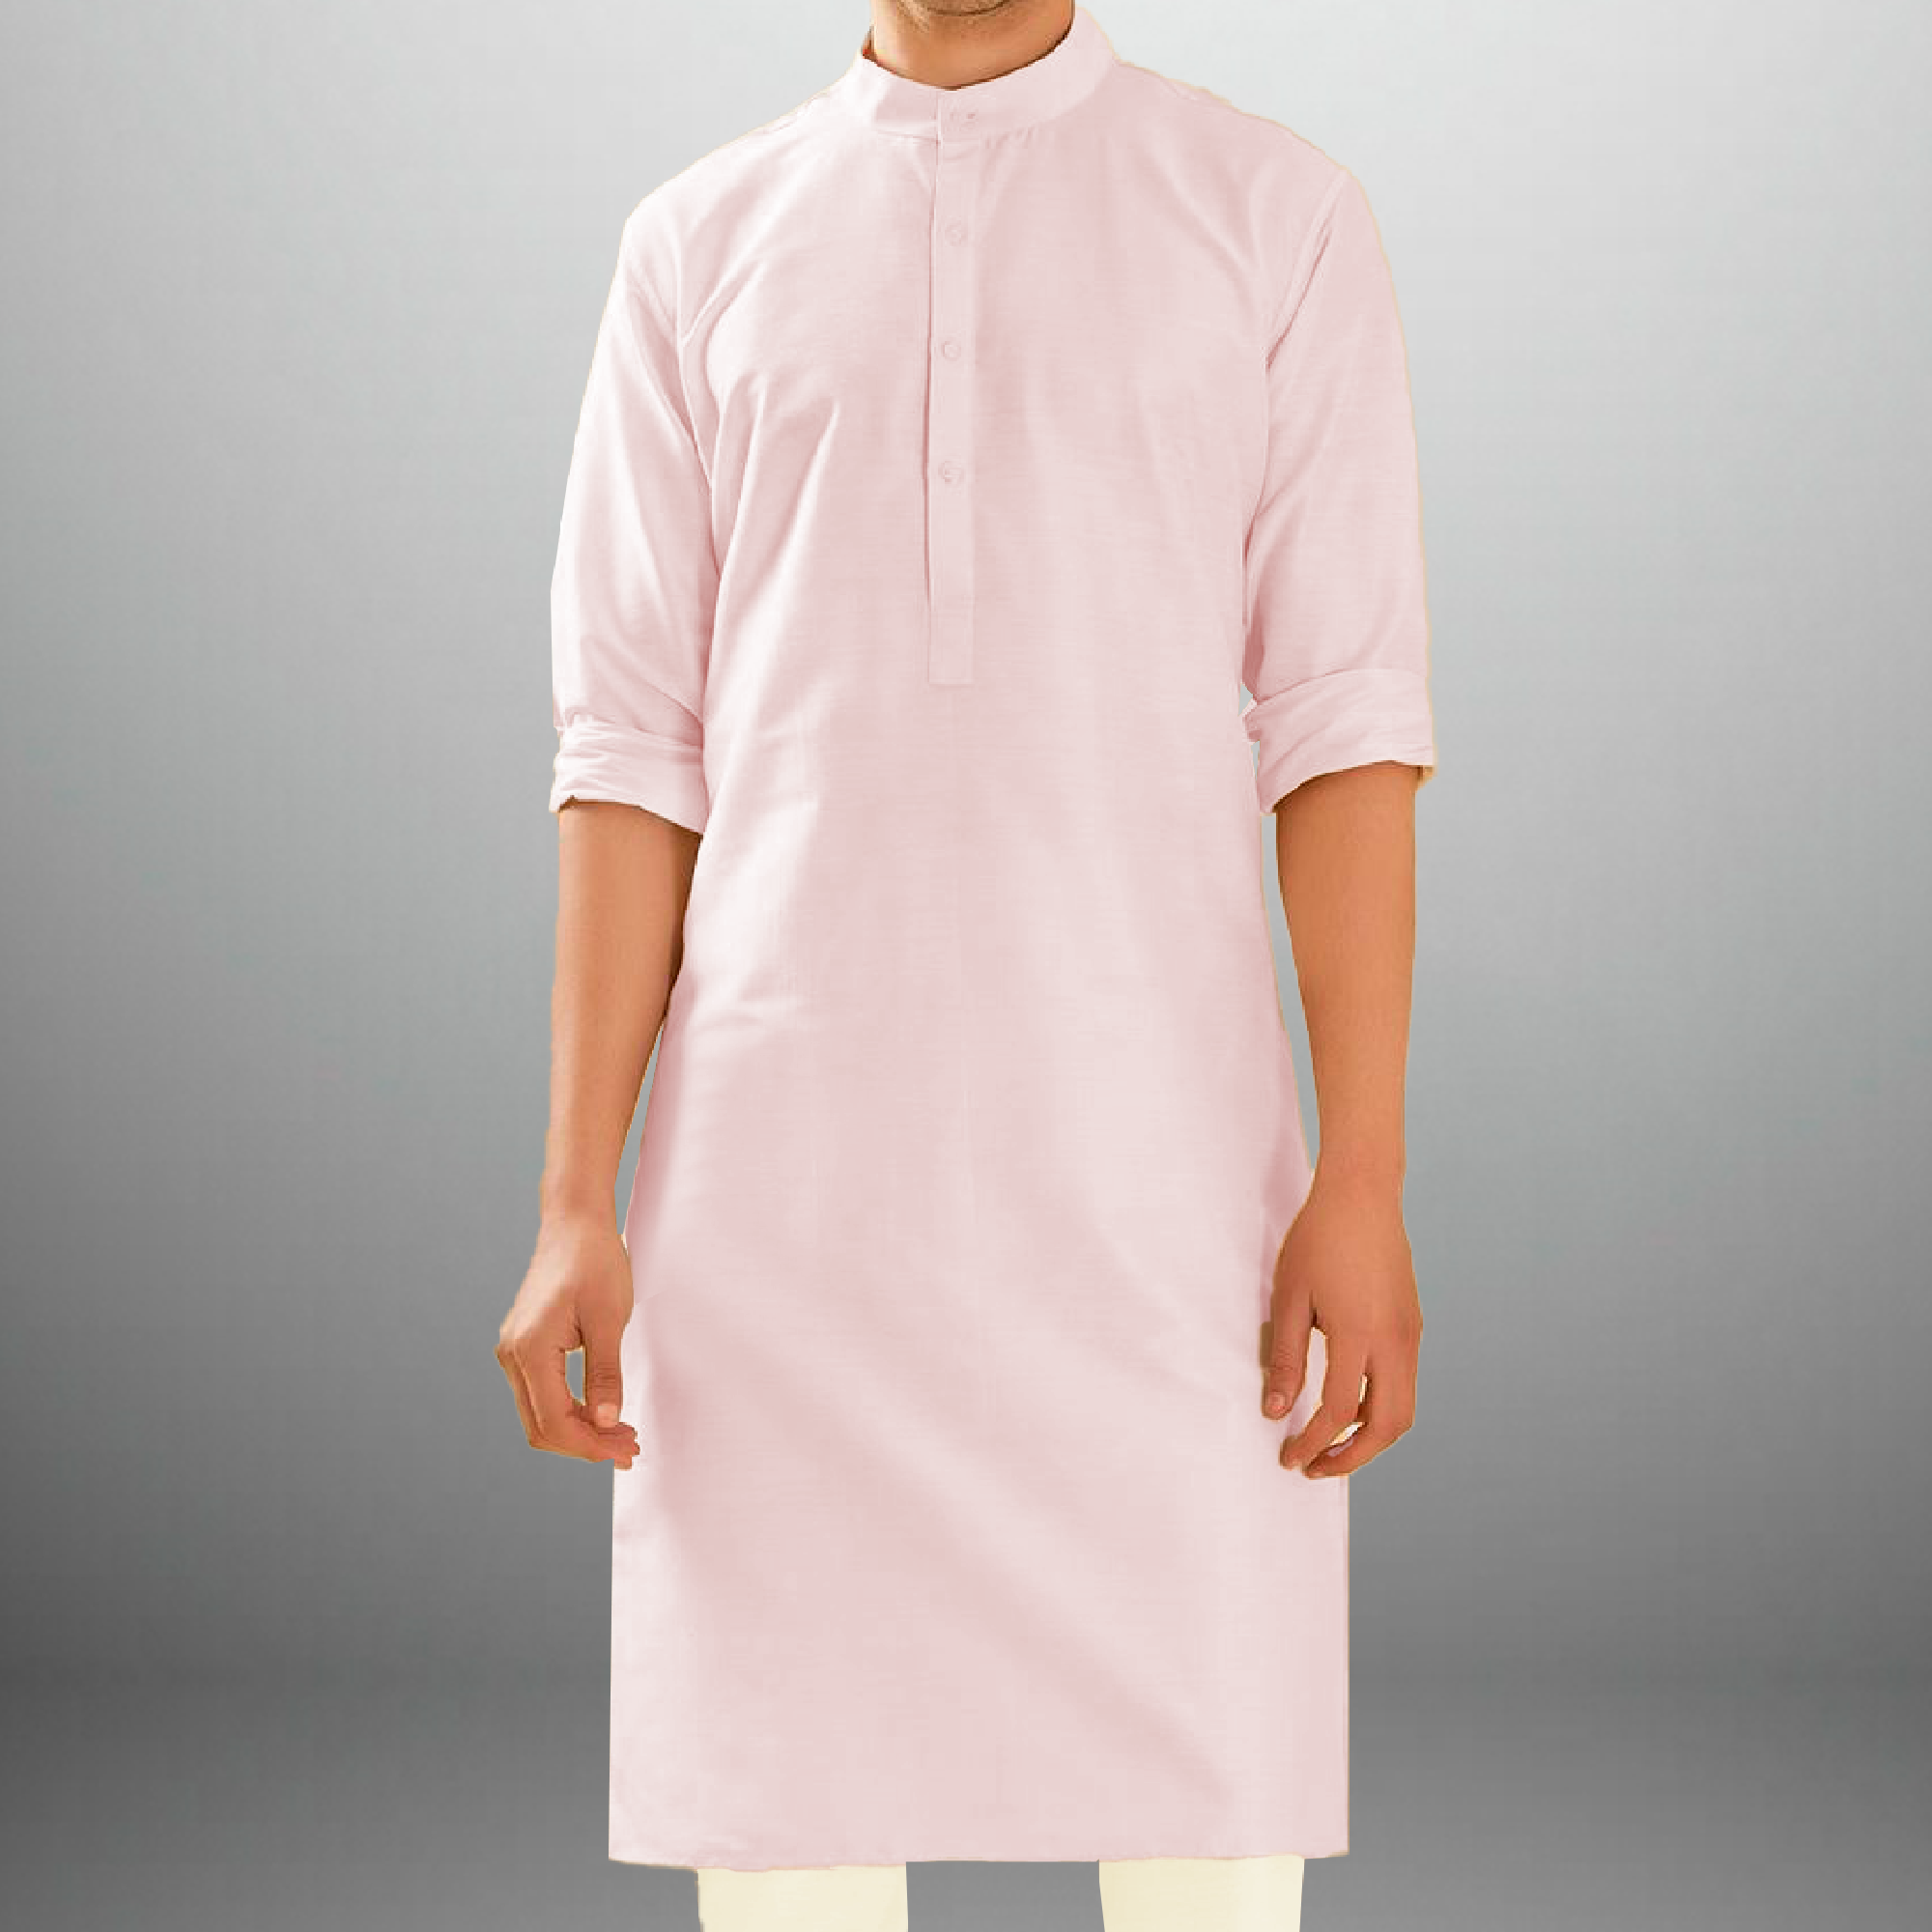 Men's Pale pink Solid kurta with buttons-RMEK022